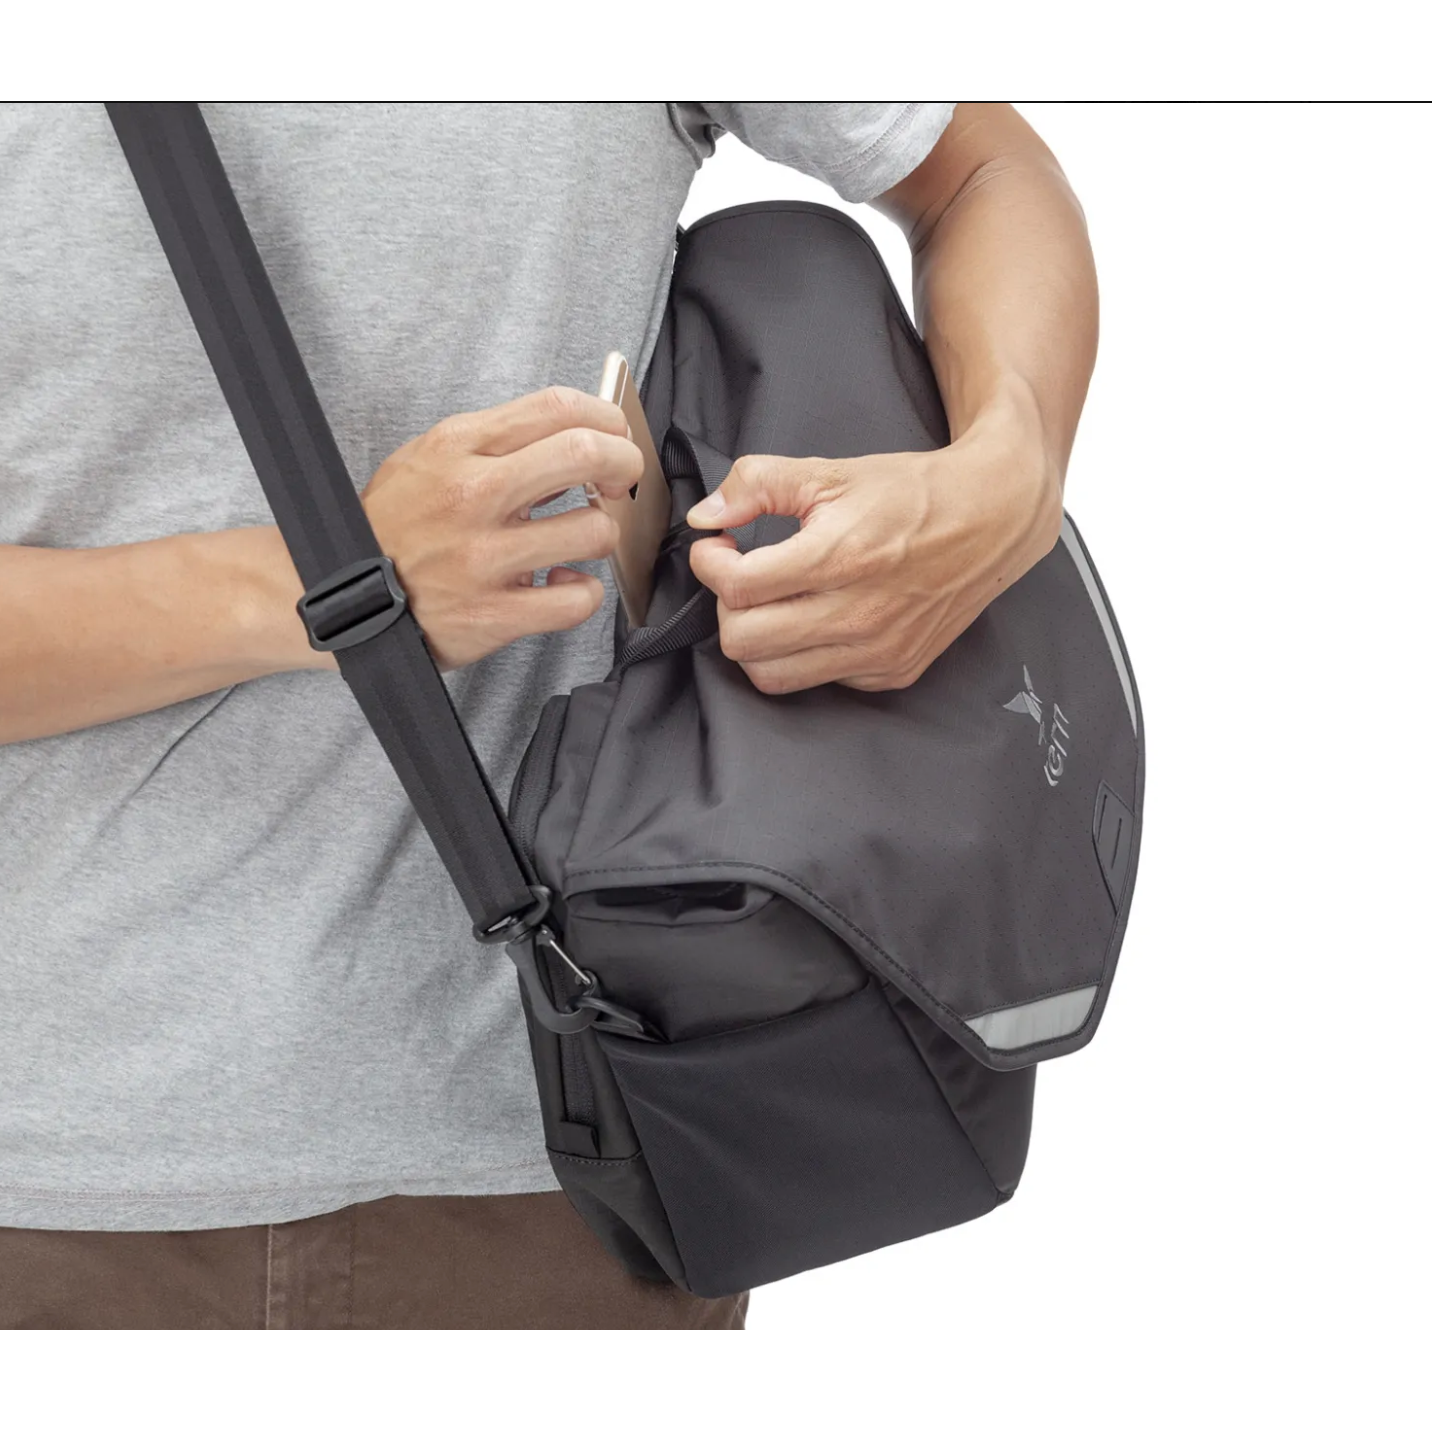 Tern Go-To Bag - Power in Motion